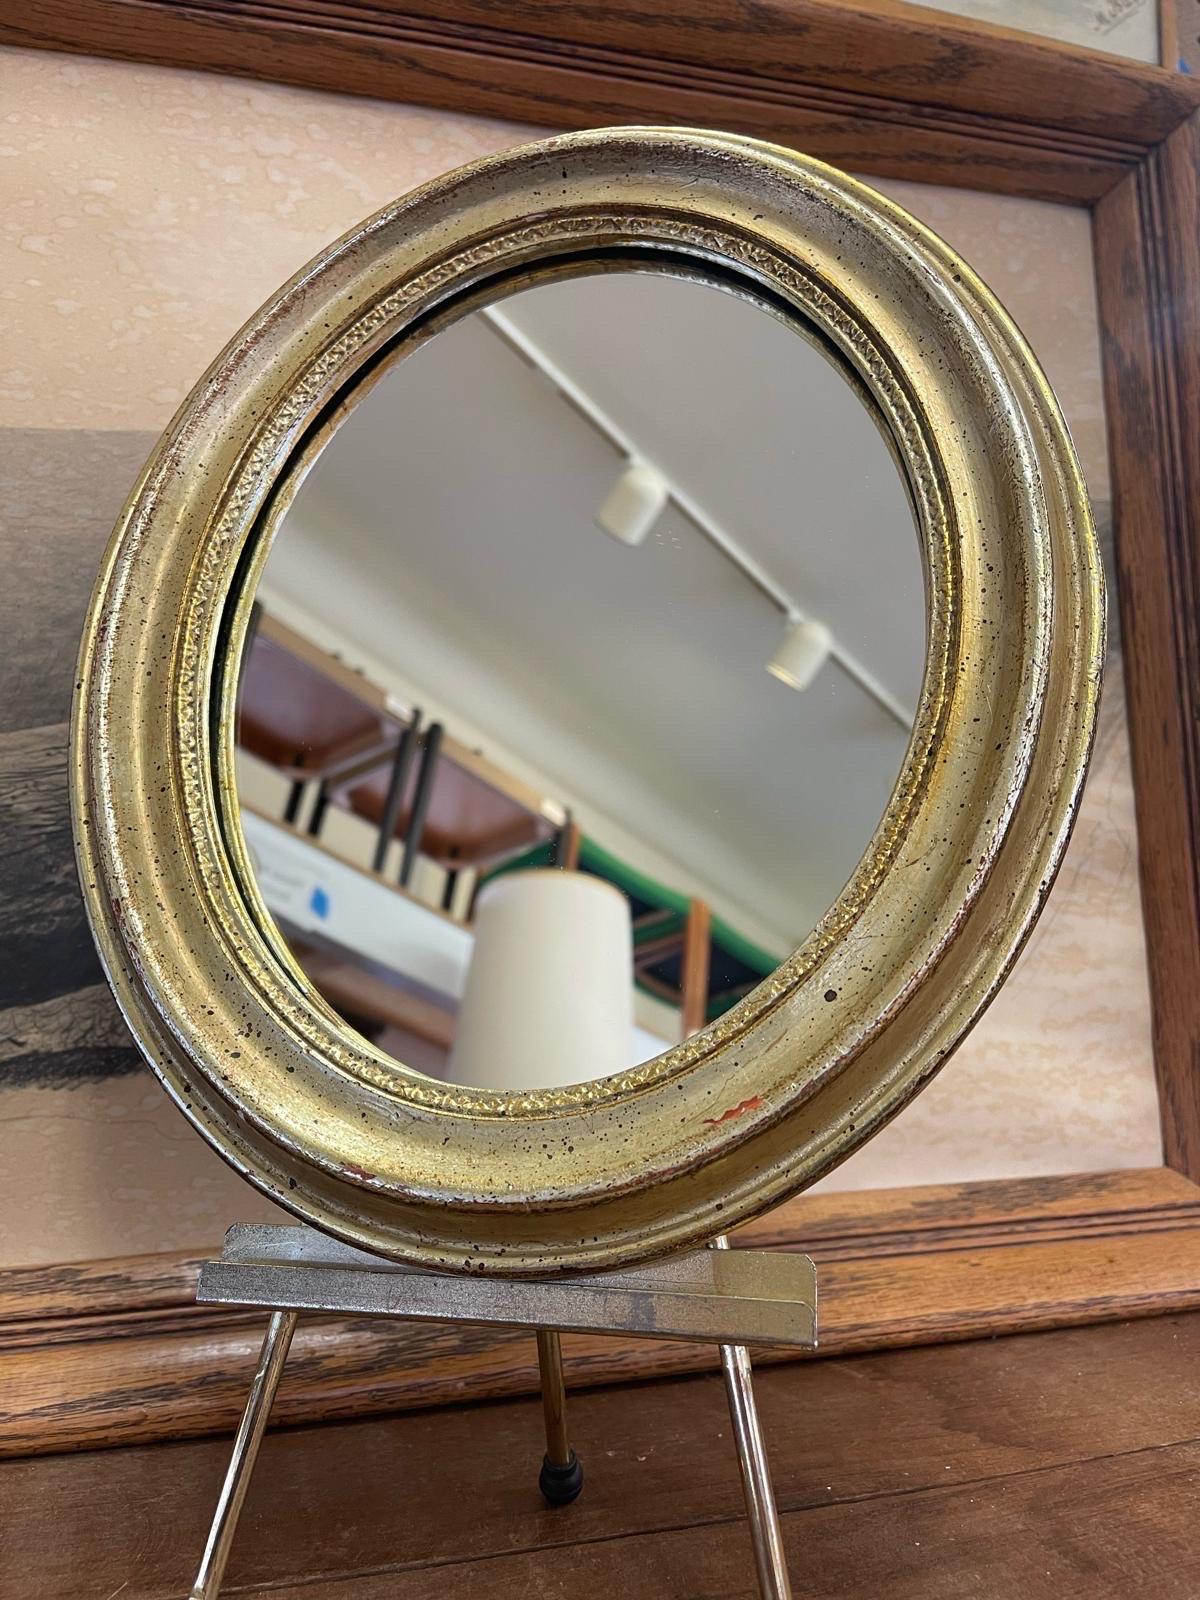 Oval  shaped small wall Mirror with gold toned painted wood framing. Stand not included. Vintage Condition Consistent with Age as Pictured.

Dimensions. 11 W ; 1 D ; 13 H